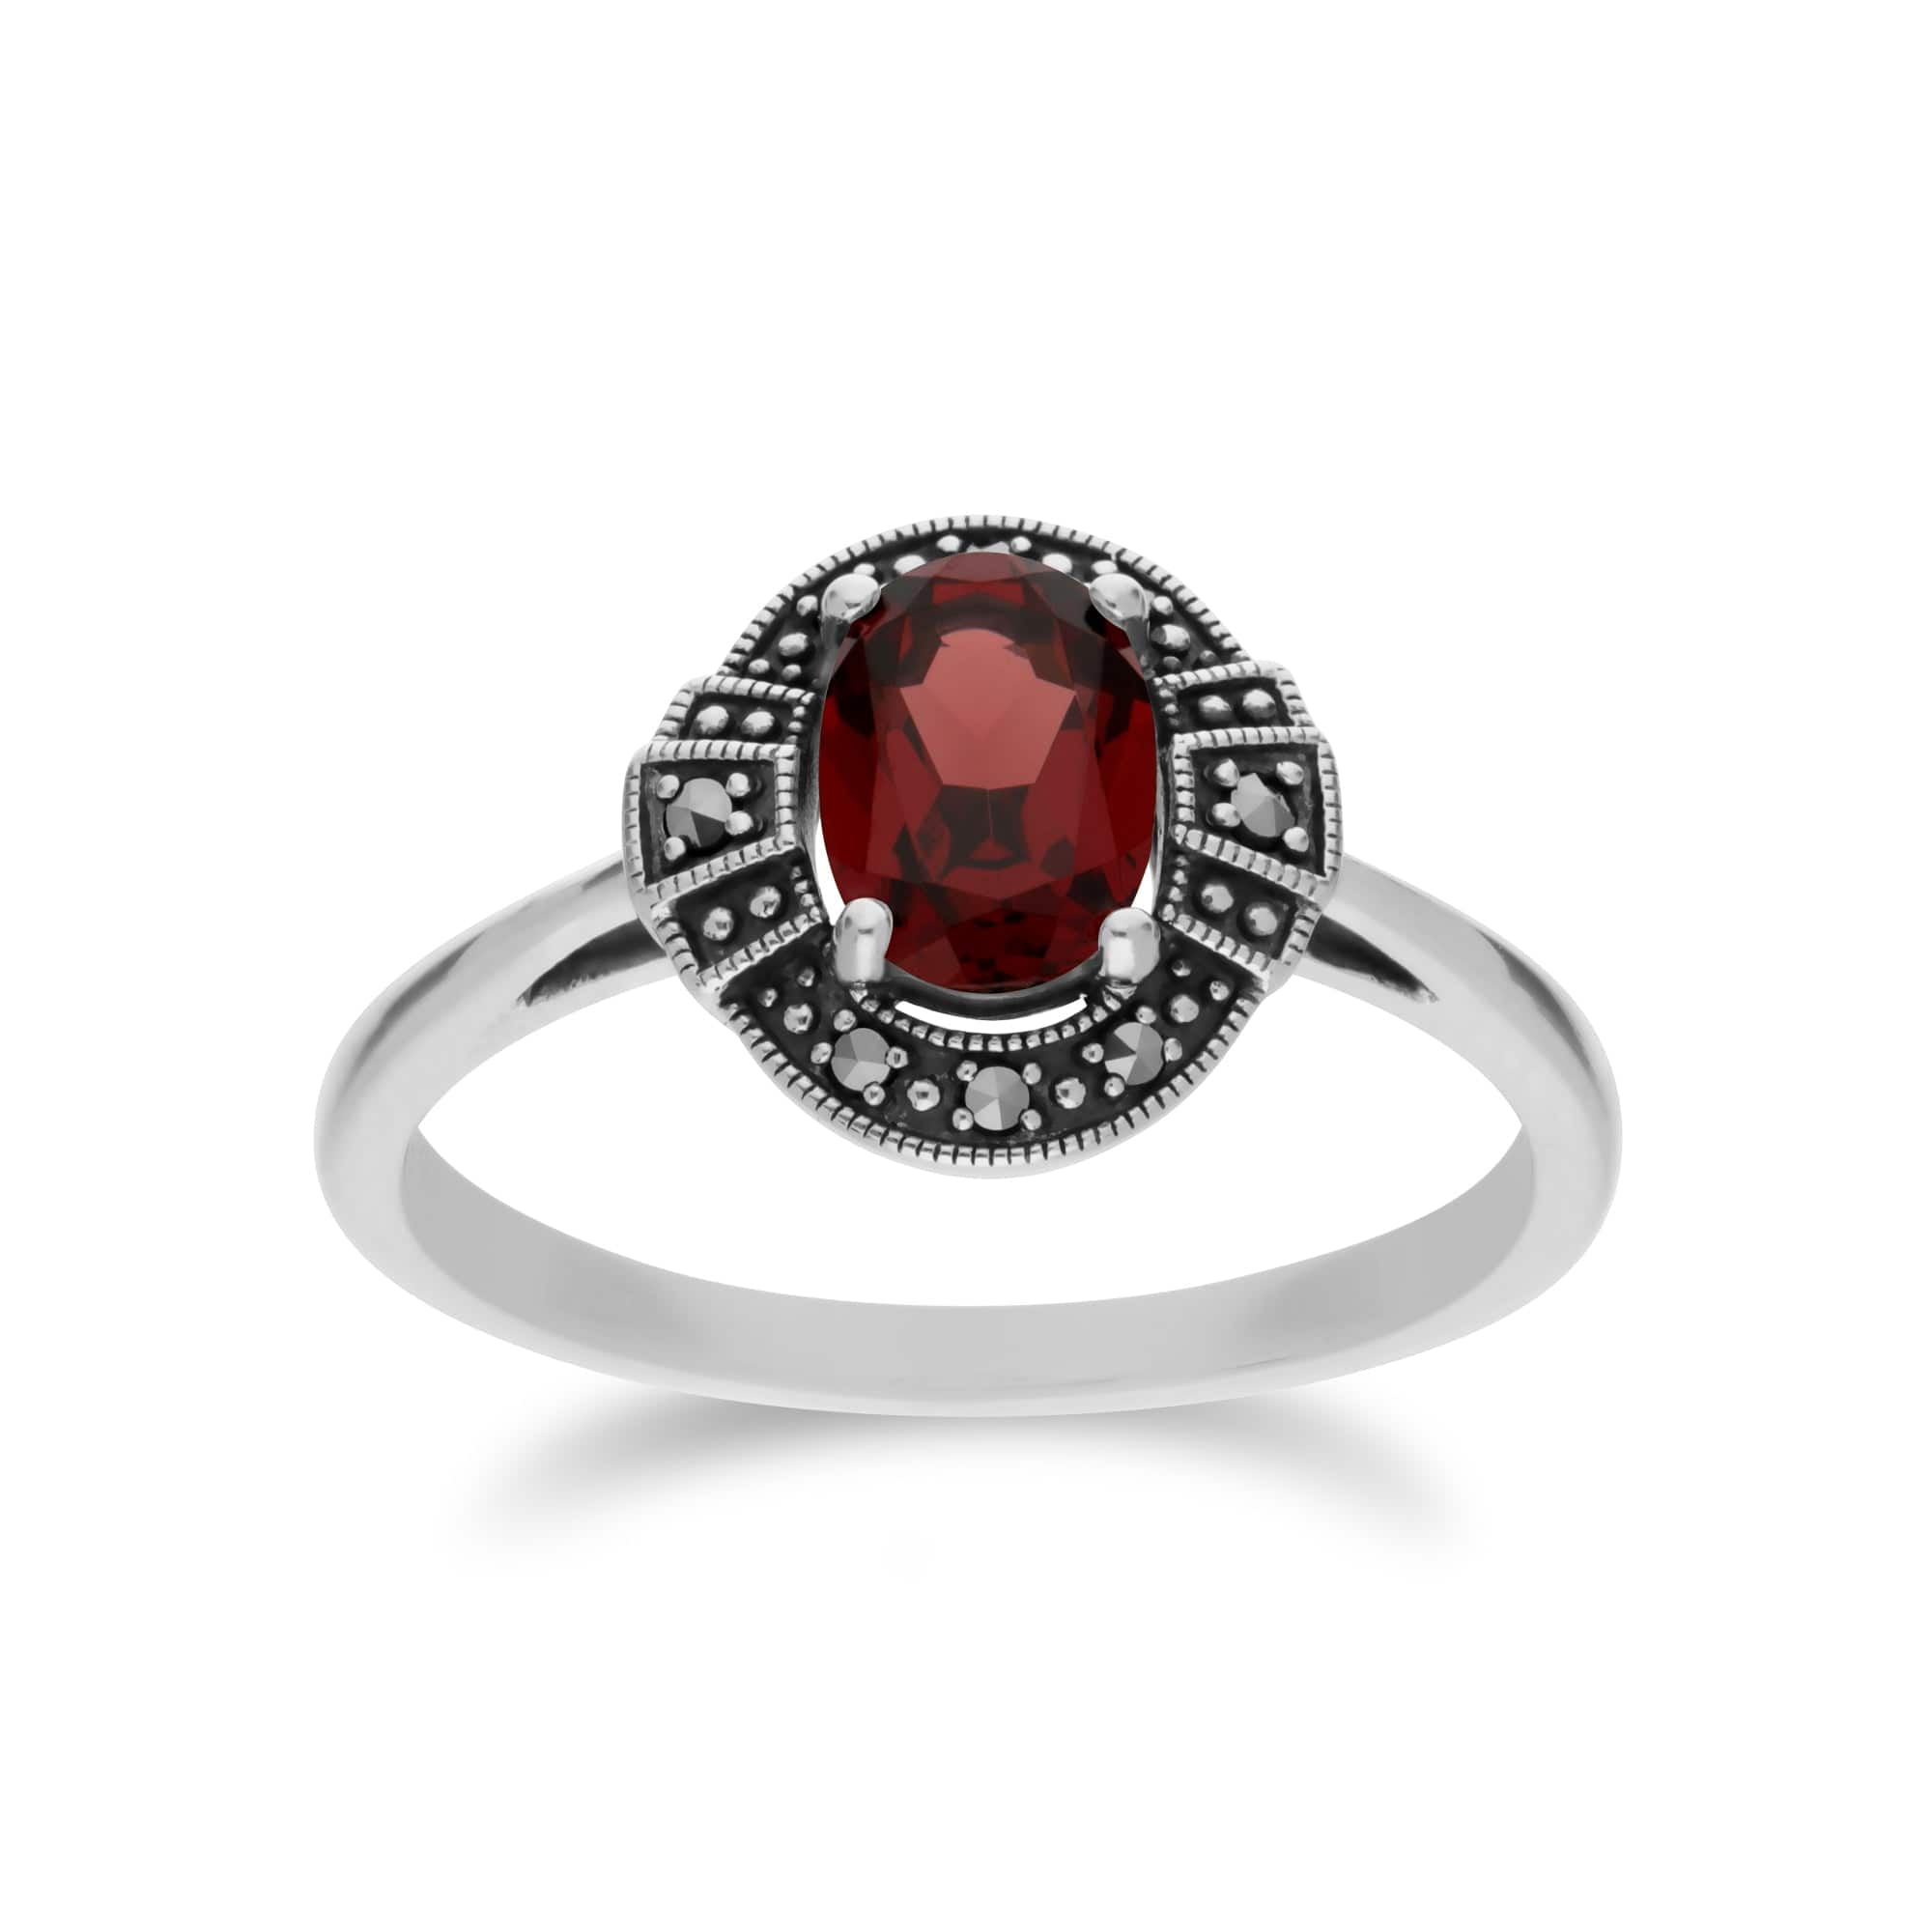 214R605703925 Art Deco Style Oval Garnet & Marcasite Halo Ring in 925 Sterling Silver 1